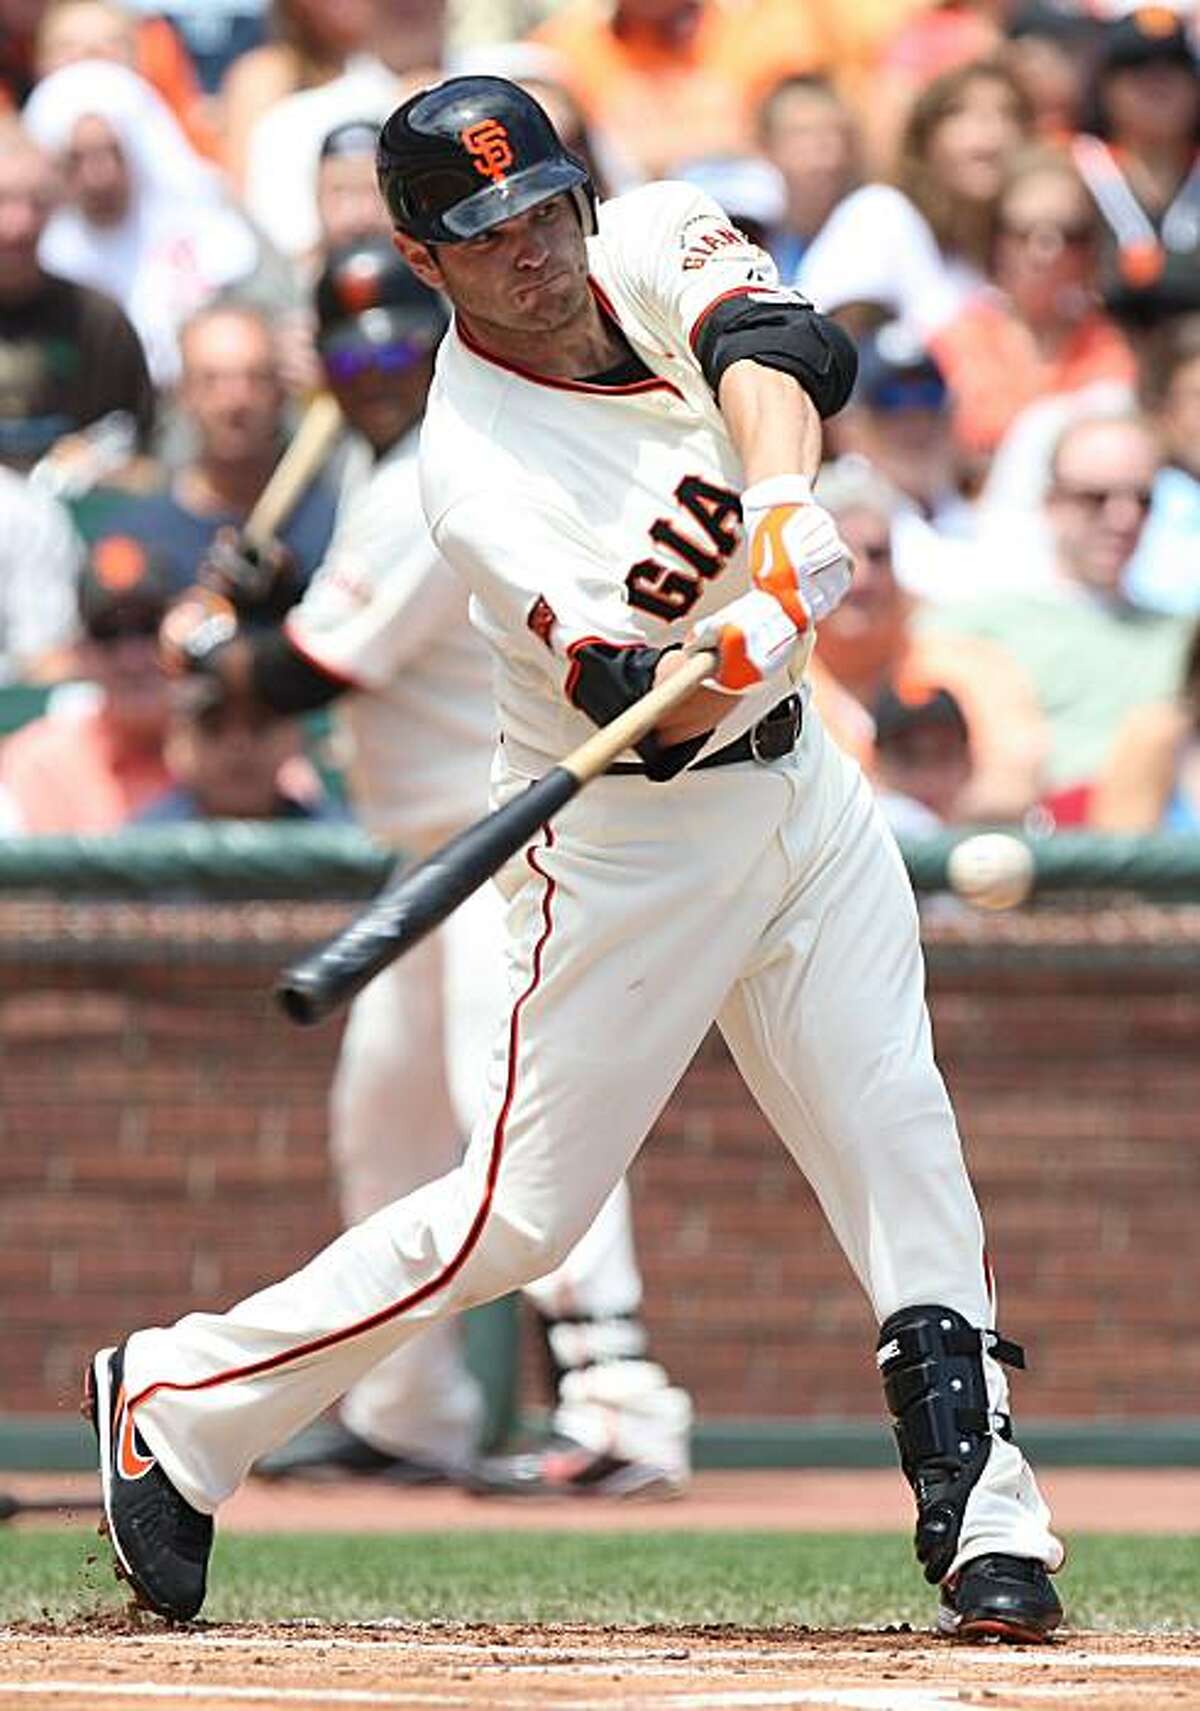 SAN FRANCISCO - AUGUST 02: Freddy Sanchez #21 of the San Francisco Giants singles in the first inning against the Philadelphia Phillies during a Major League Baseball game at AT&T Park on August 2, 2009 in San Francisco, California. (Photo by Jed Jacobsohn/Getty Images)